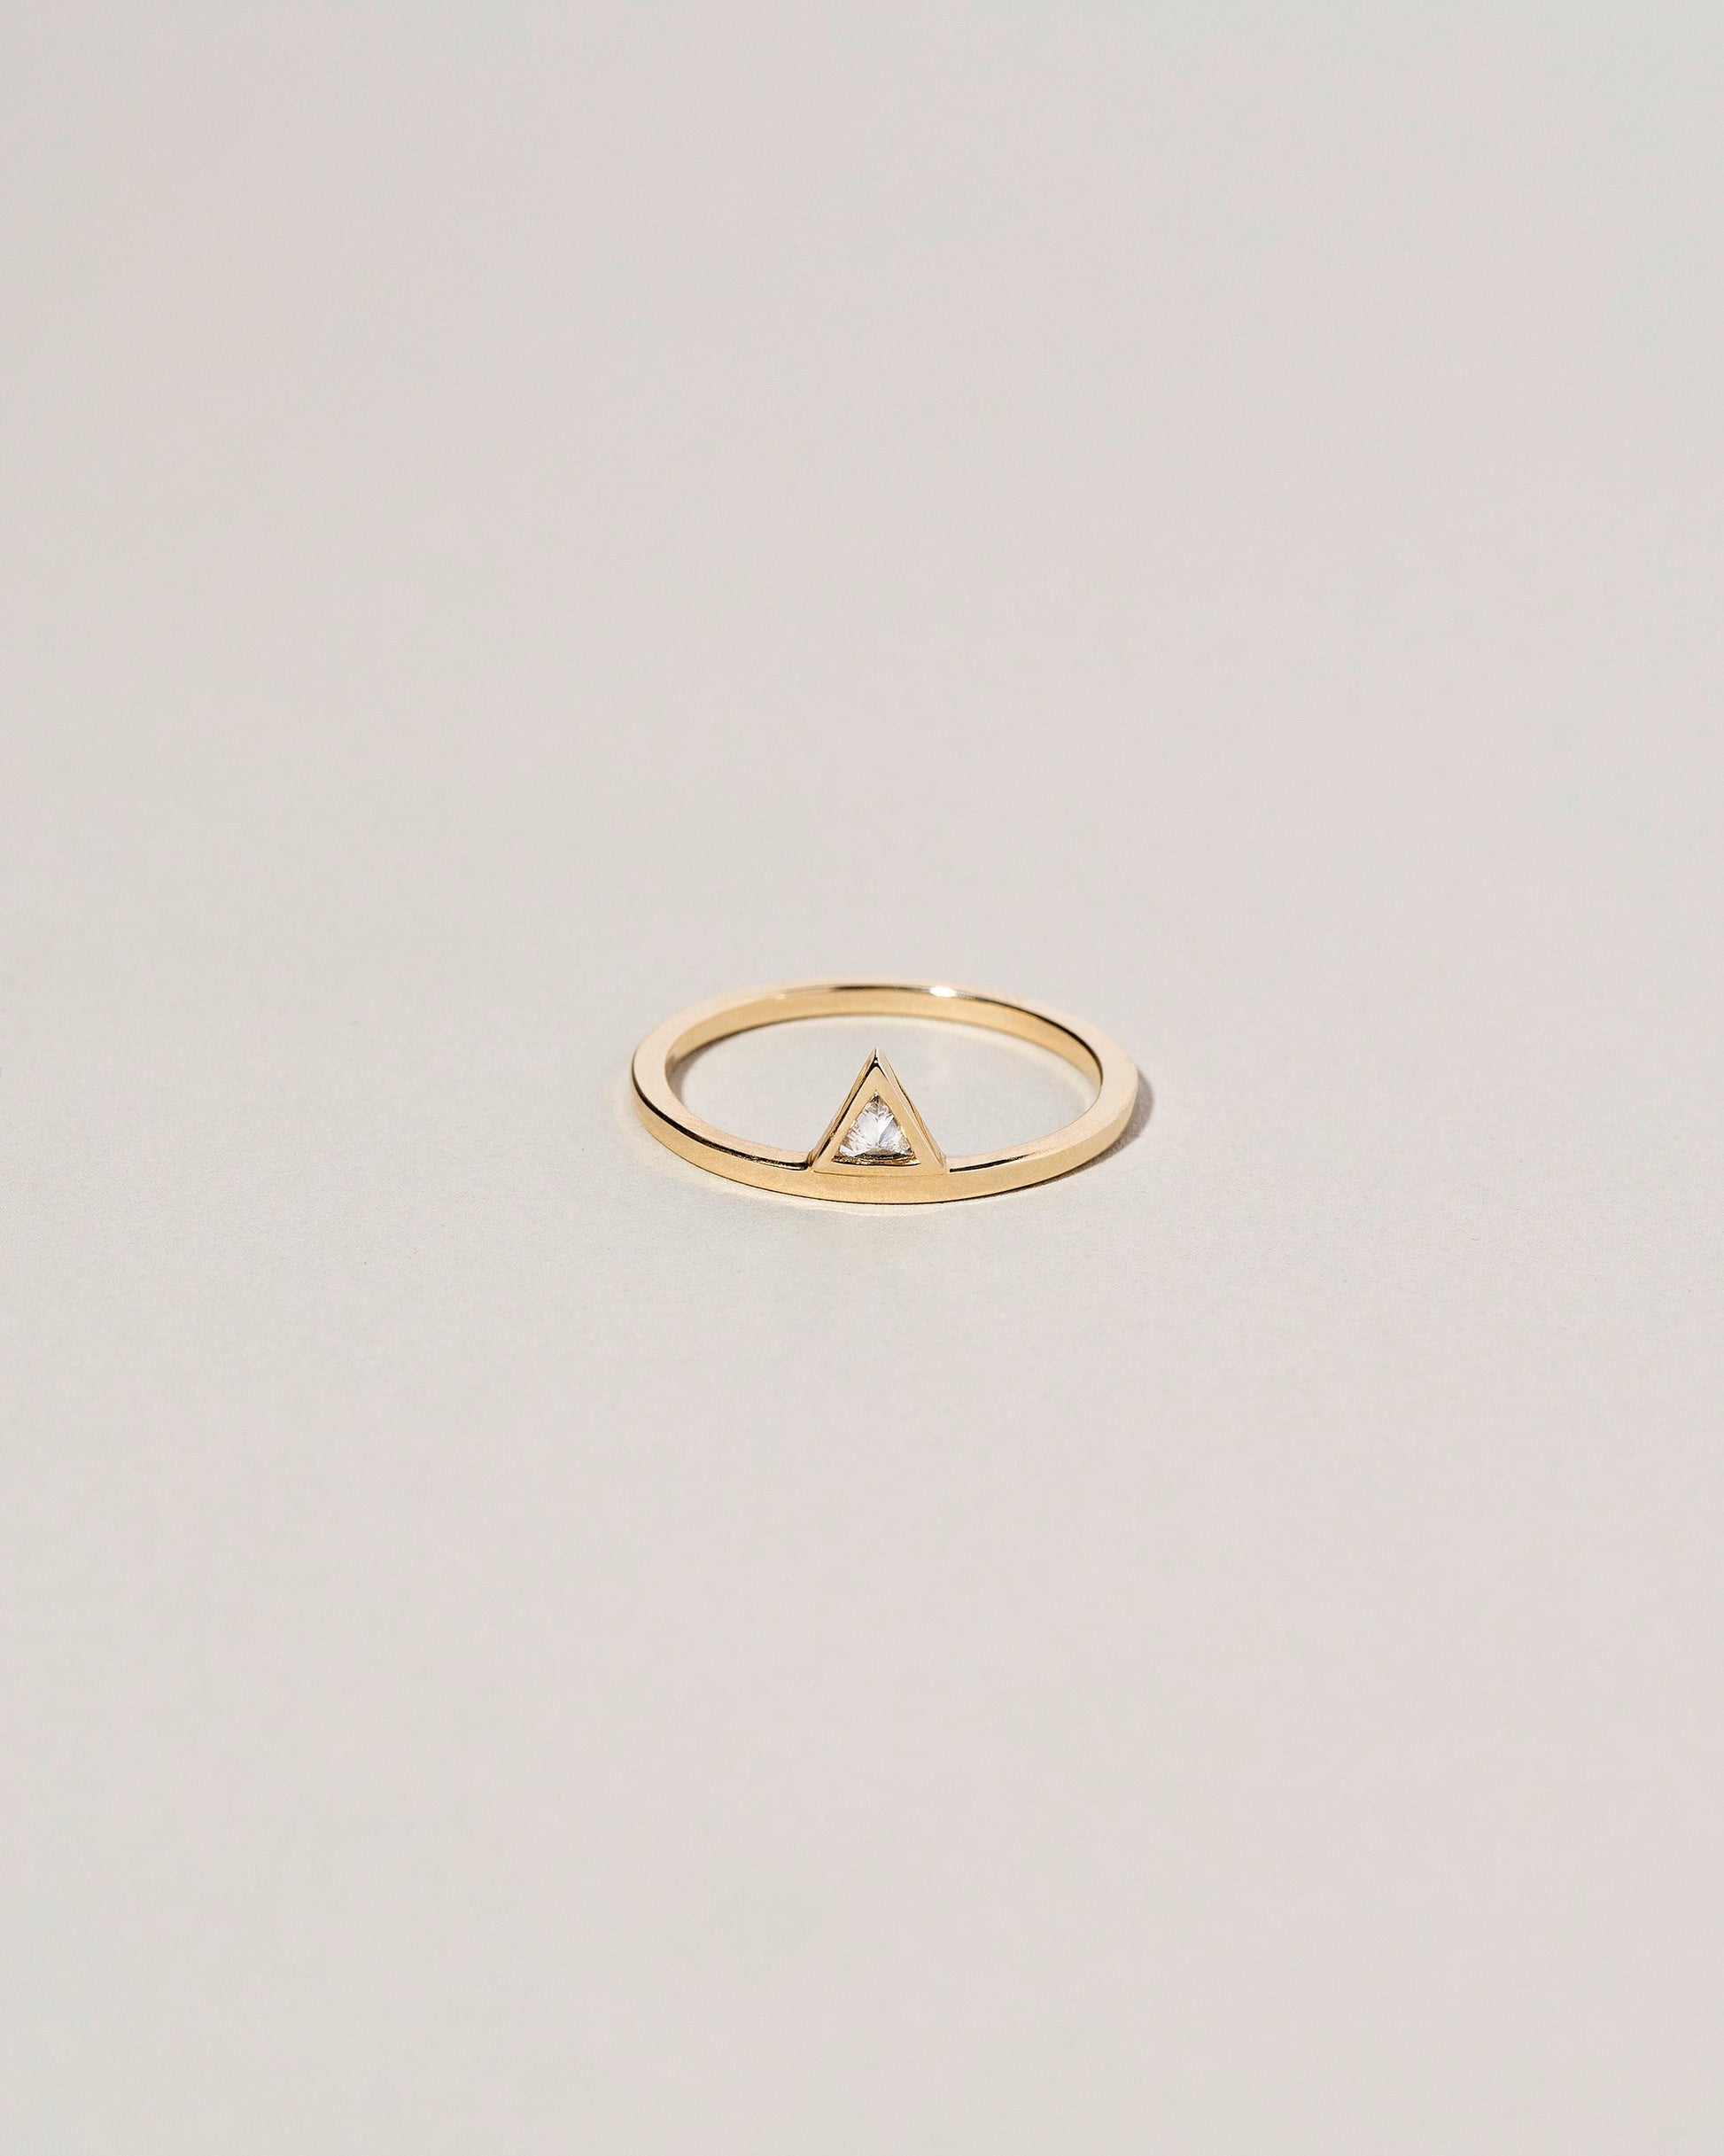  Stacked Ring - Triangle on light color background.